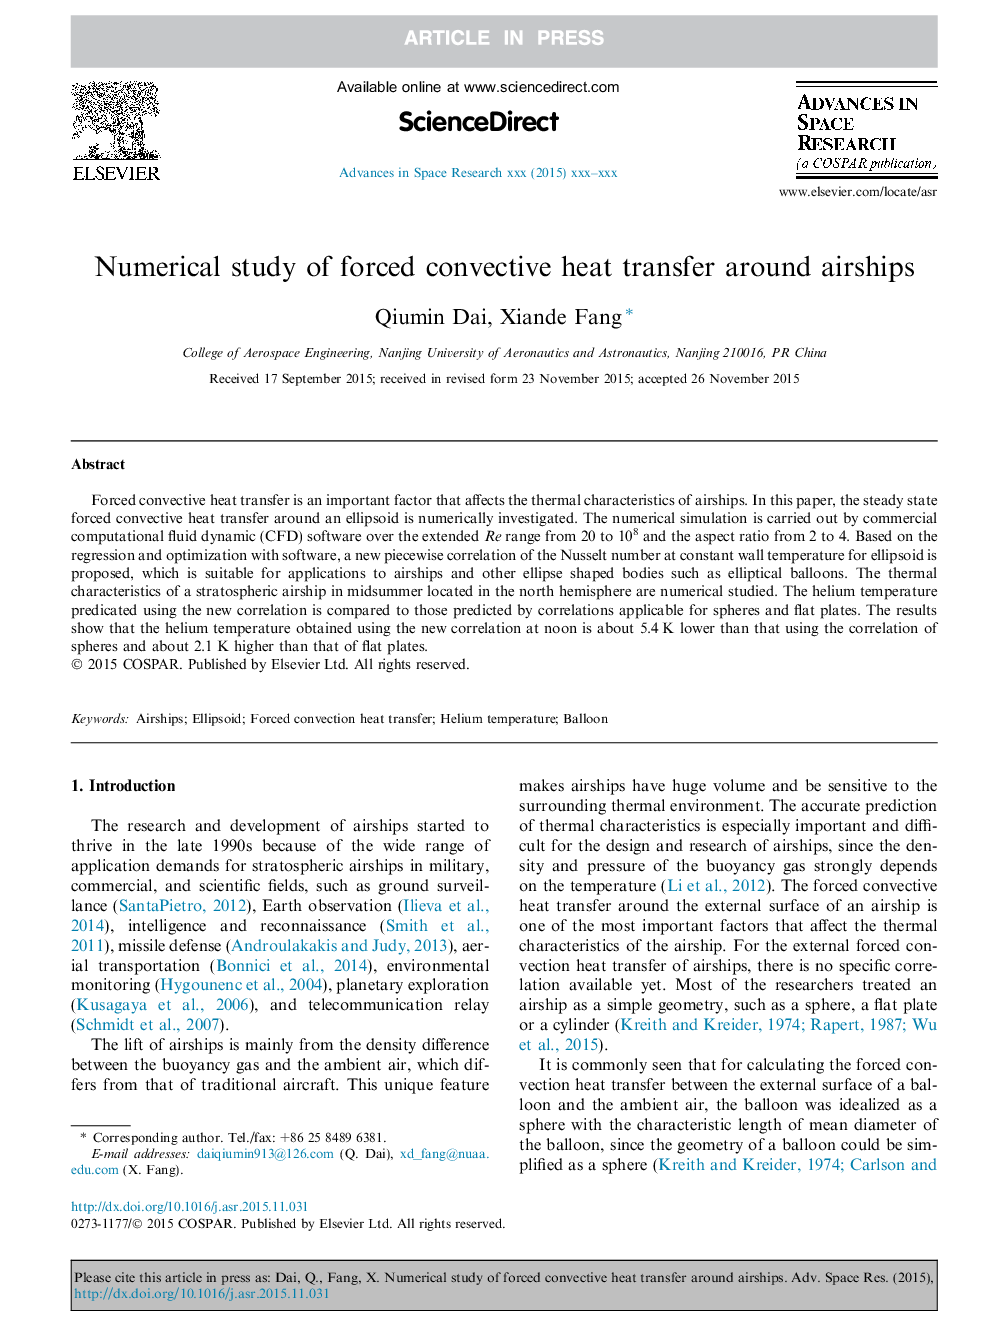 Numerical study of forced convective heat transfer around airships